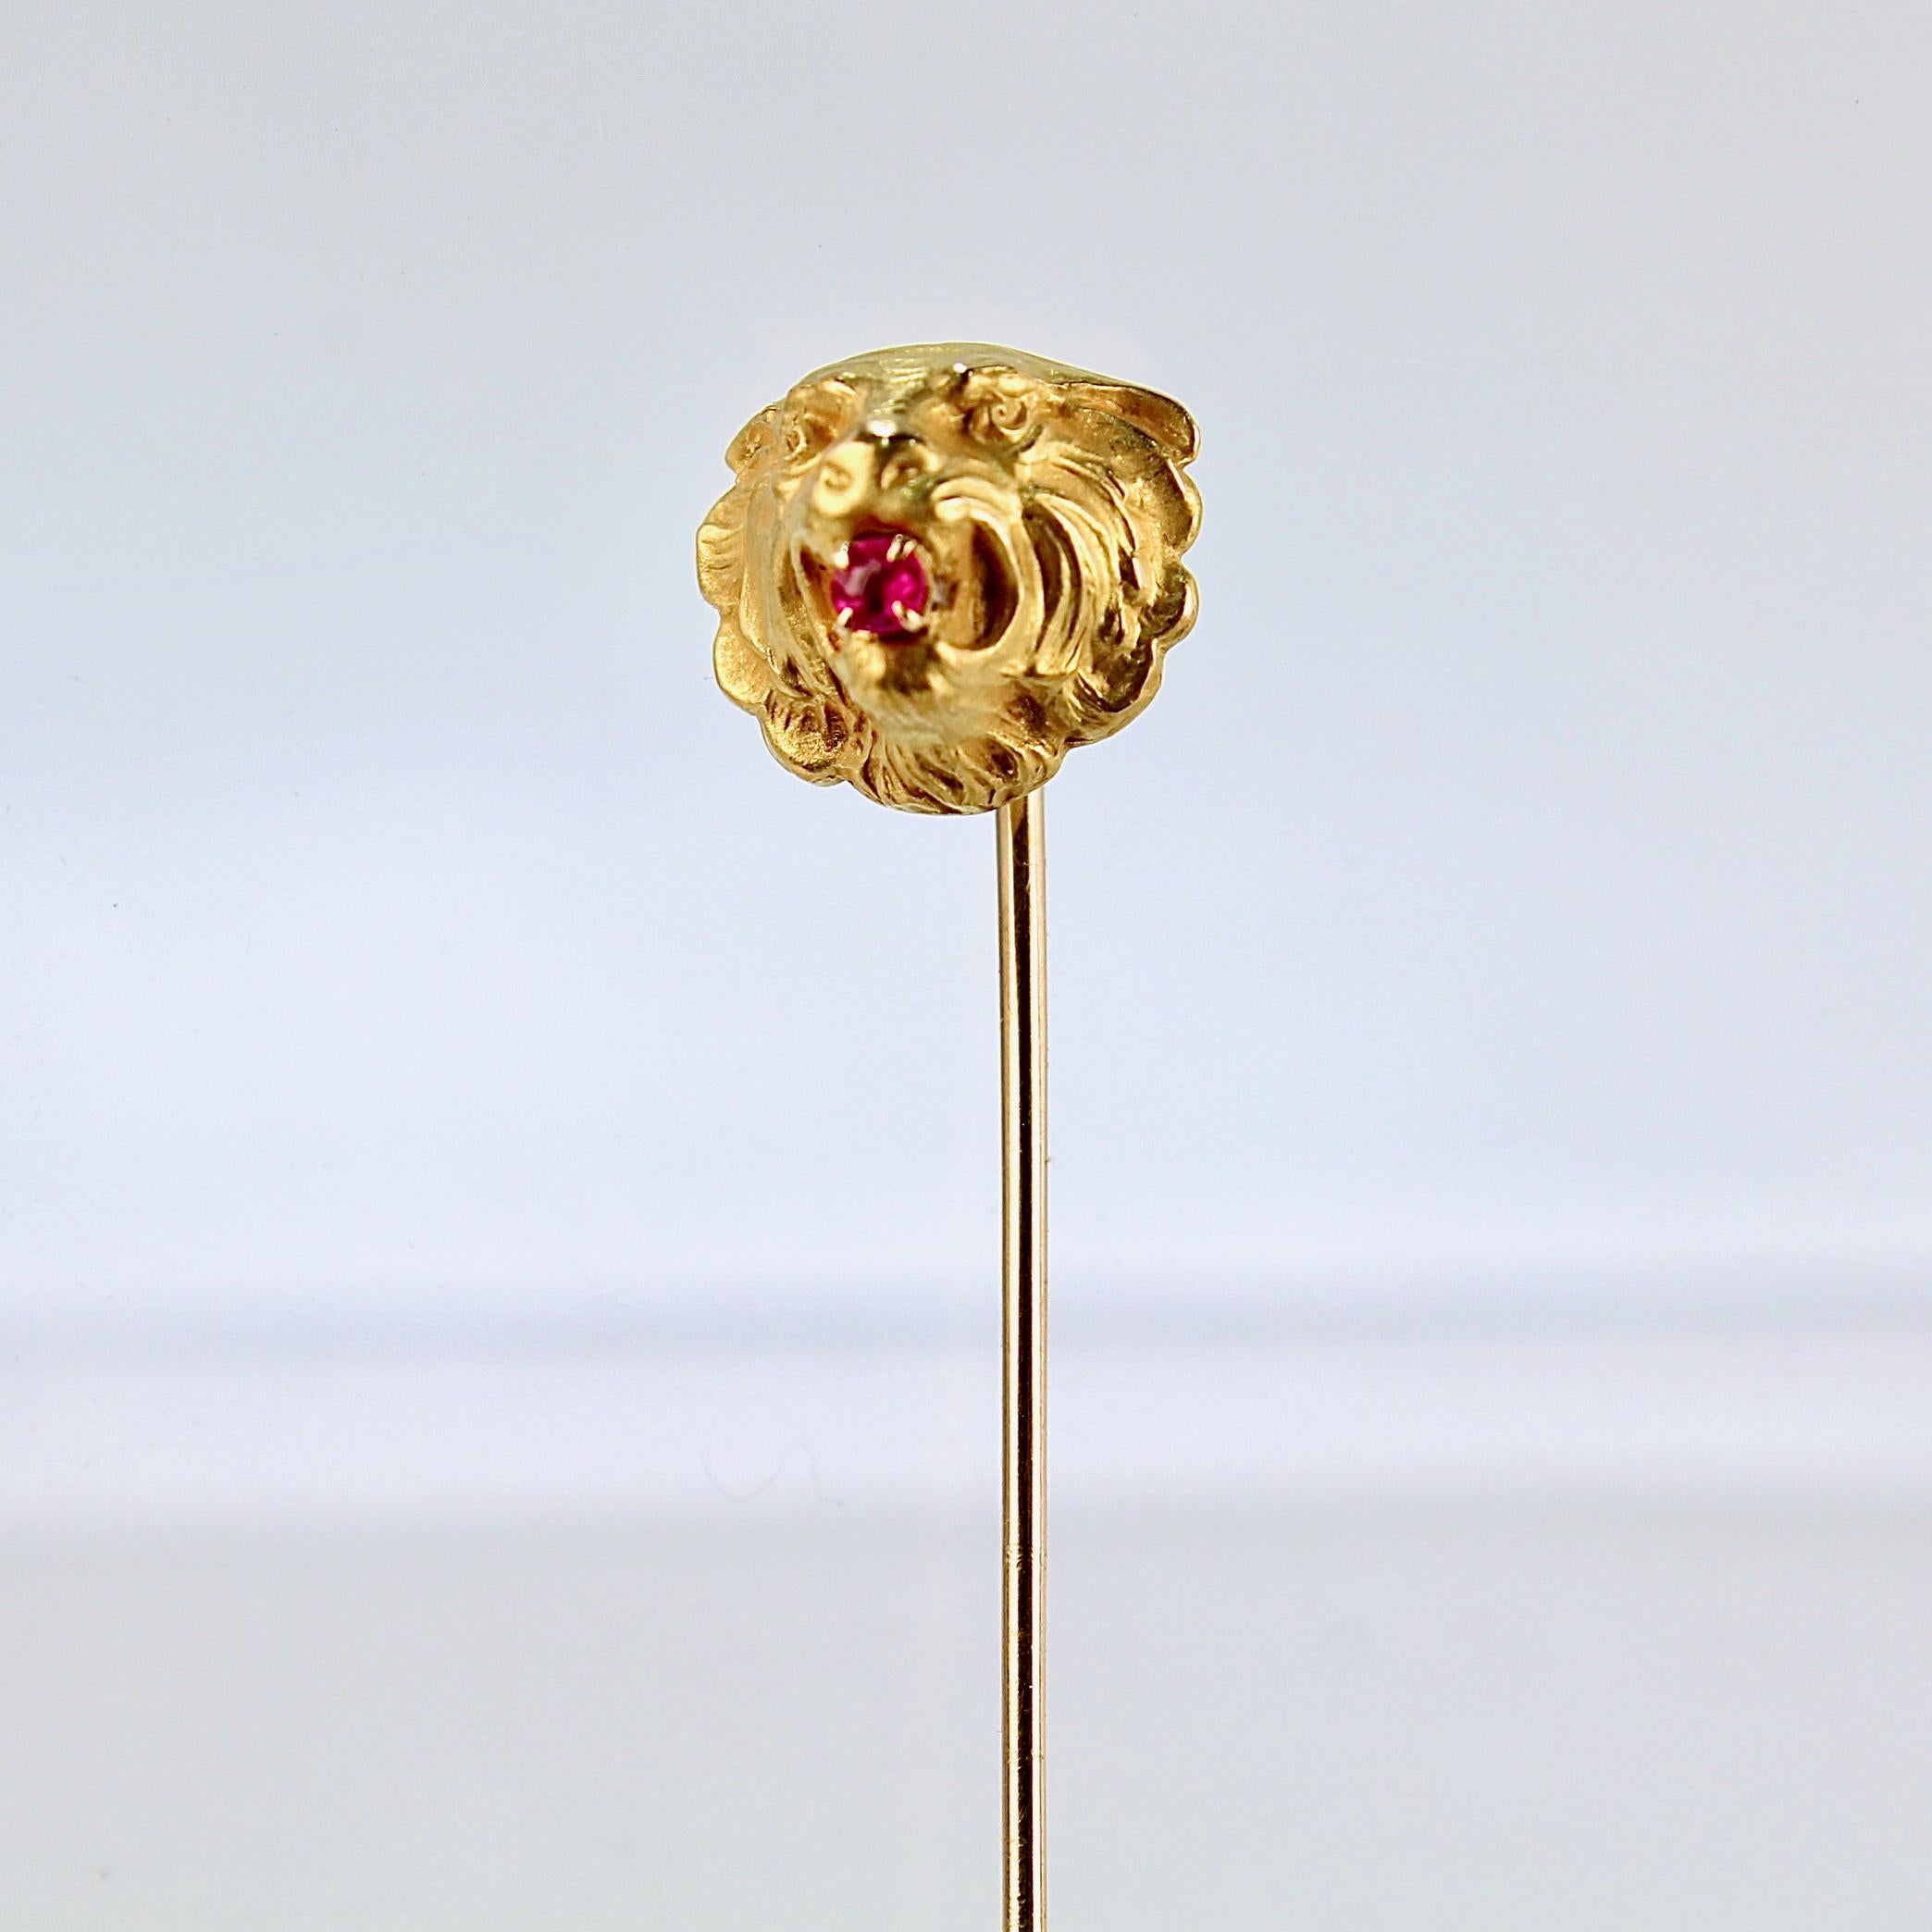 A very fine antique 14k gold stickpin.

In the form of a lion's head with a round ruby prong set in mouth.

Simply a great stickpin!

Date:
Early 20th Century

Overall Condition:
It is in overall good, as-pictured, used estate condition with some